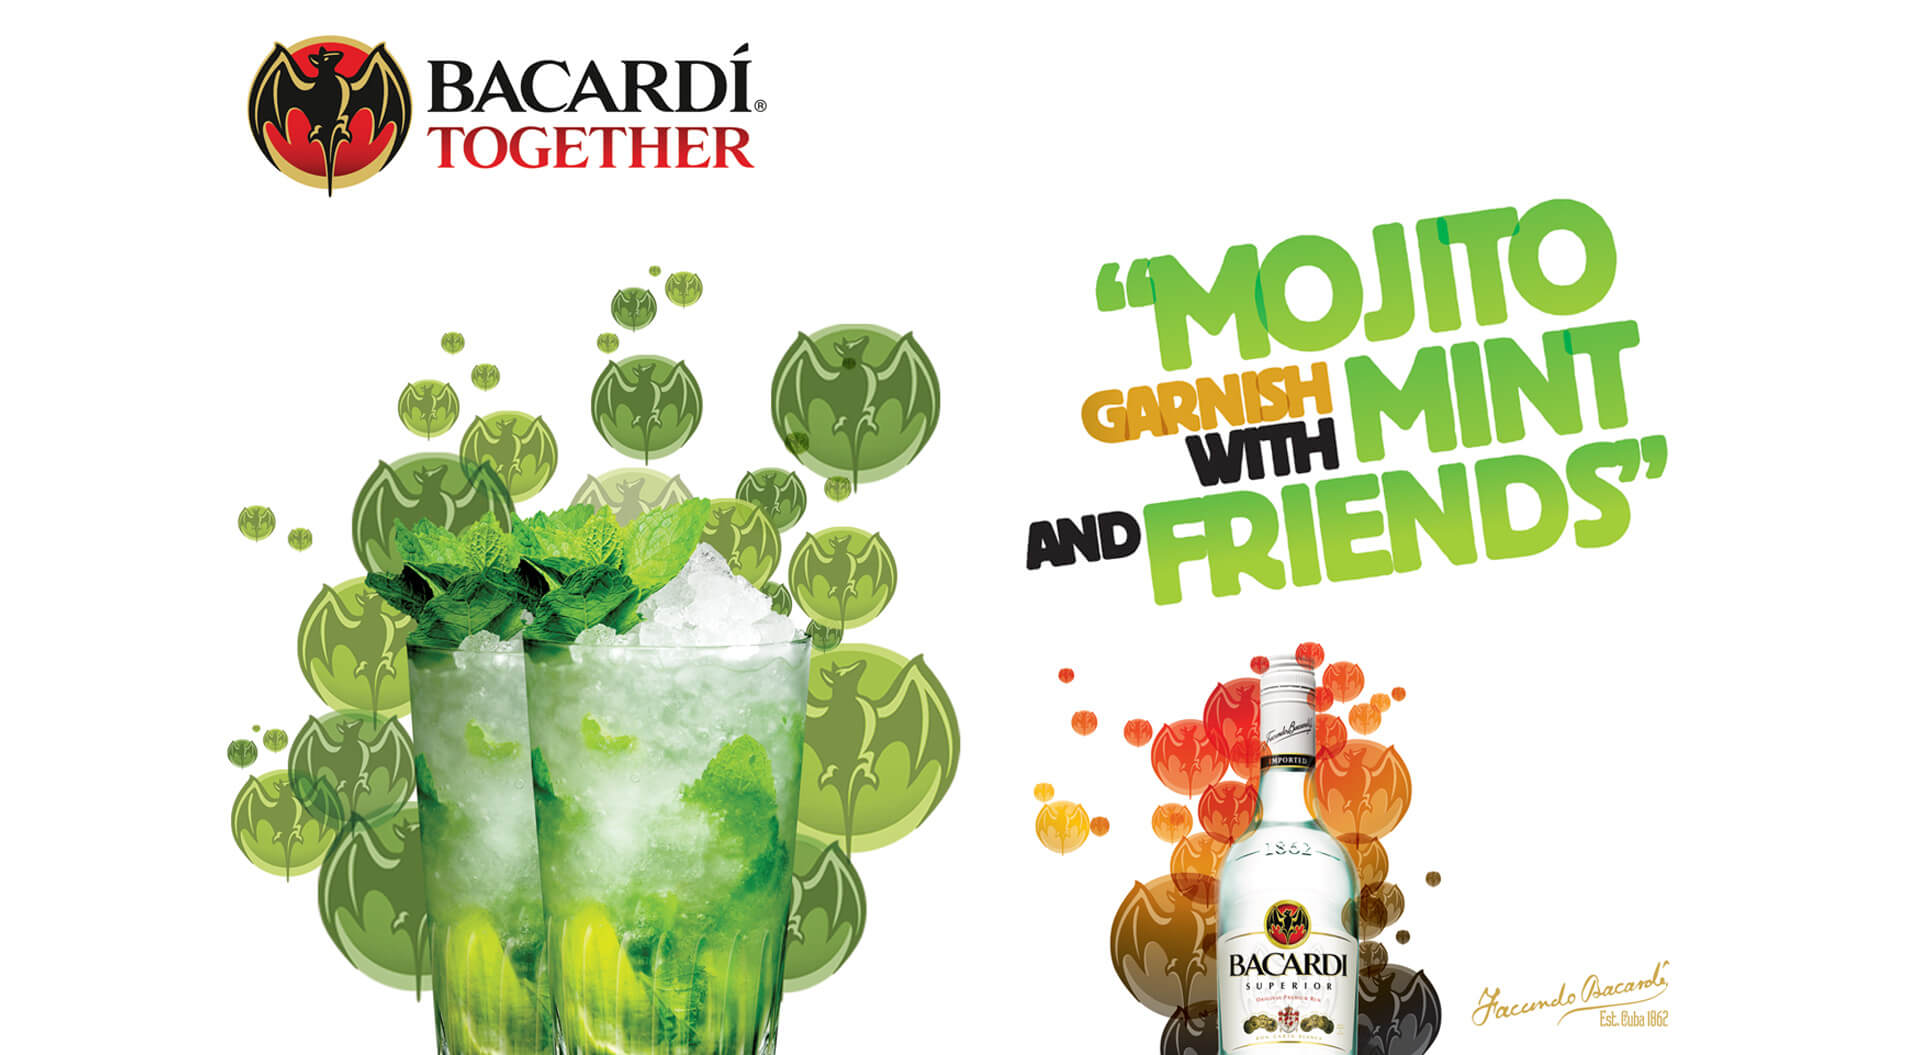 Bacardi Together brand identity Mojito garnish with mint and friends promotion campaigns for travel retail airport design